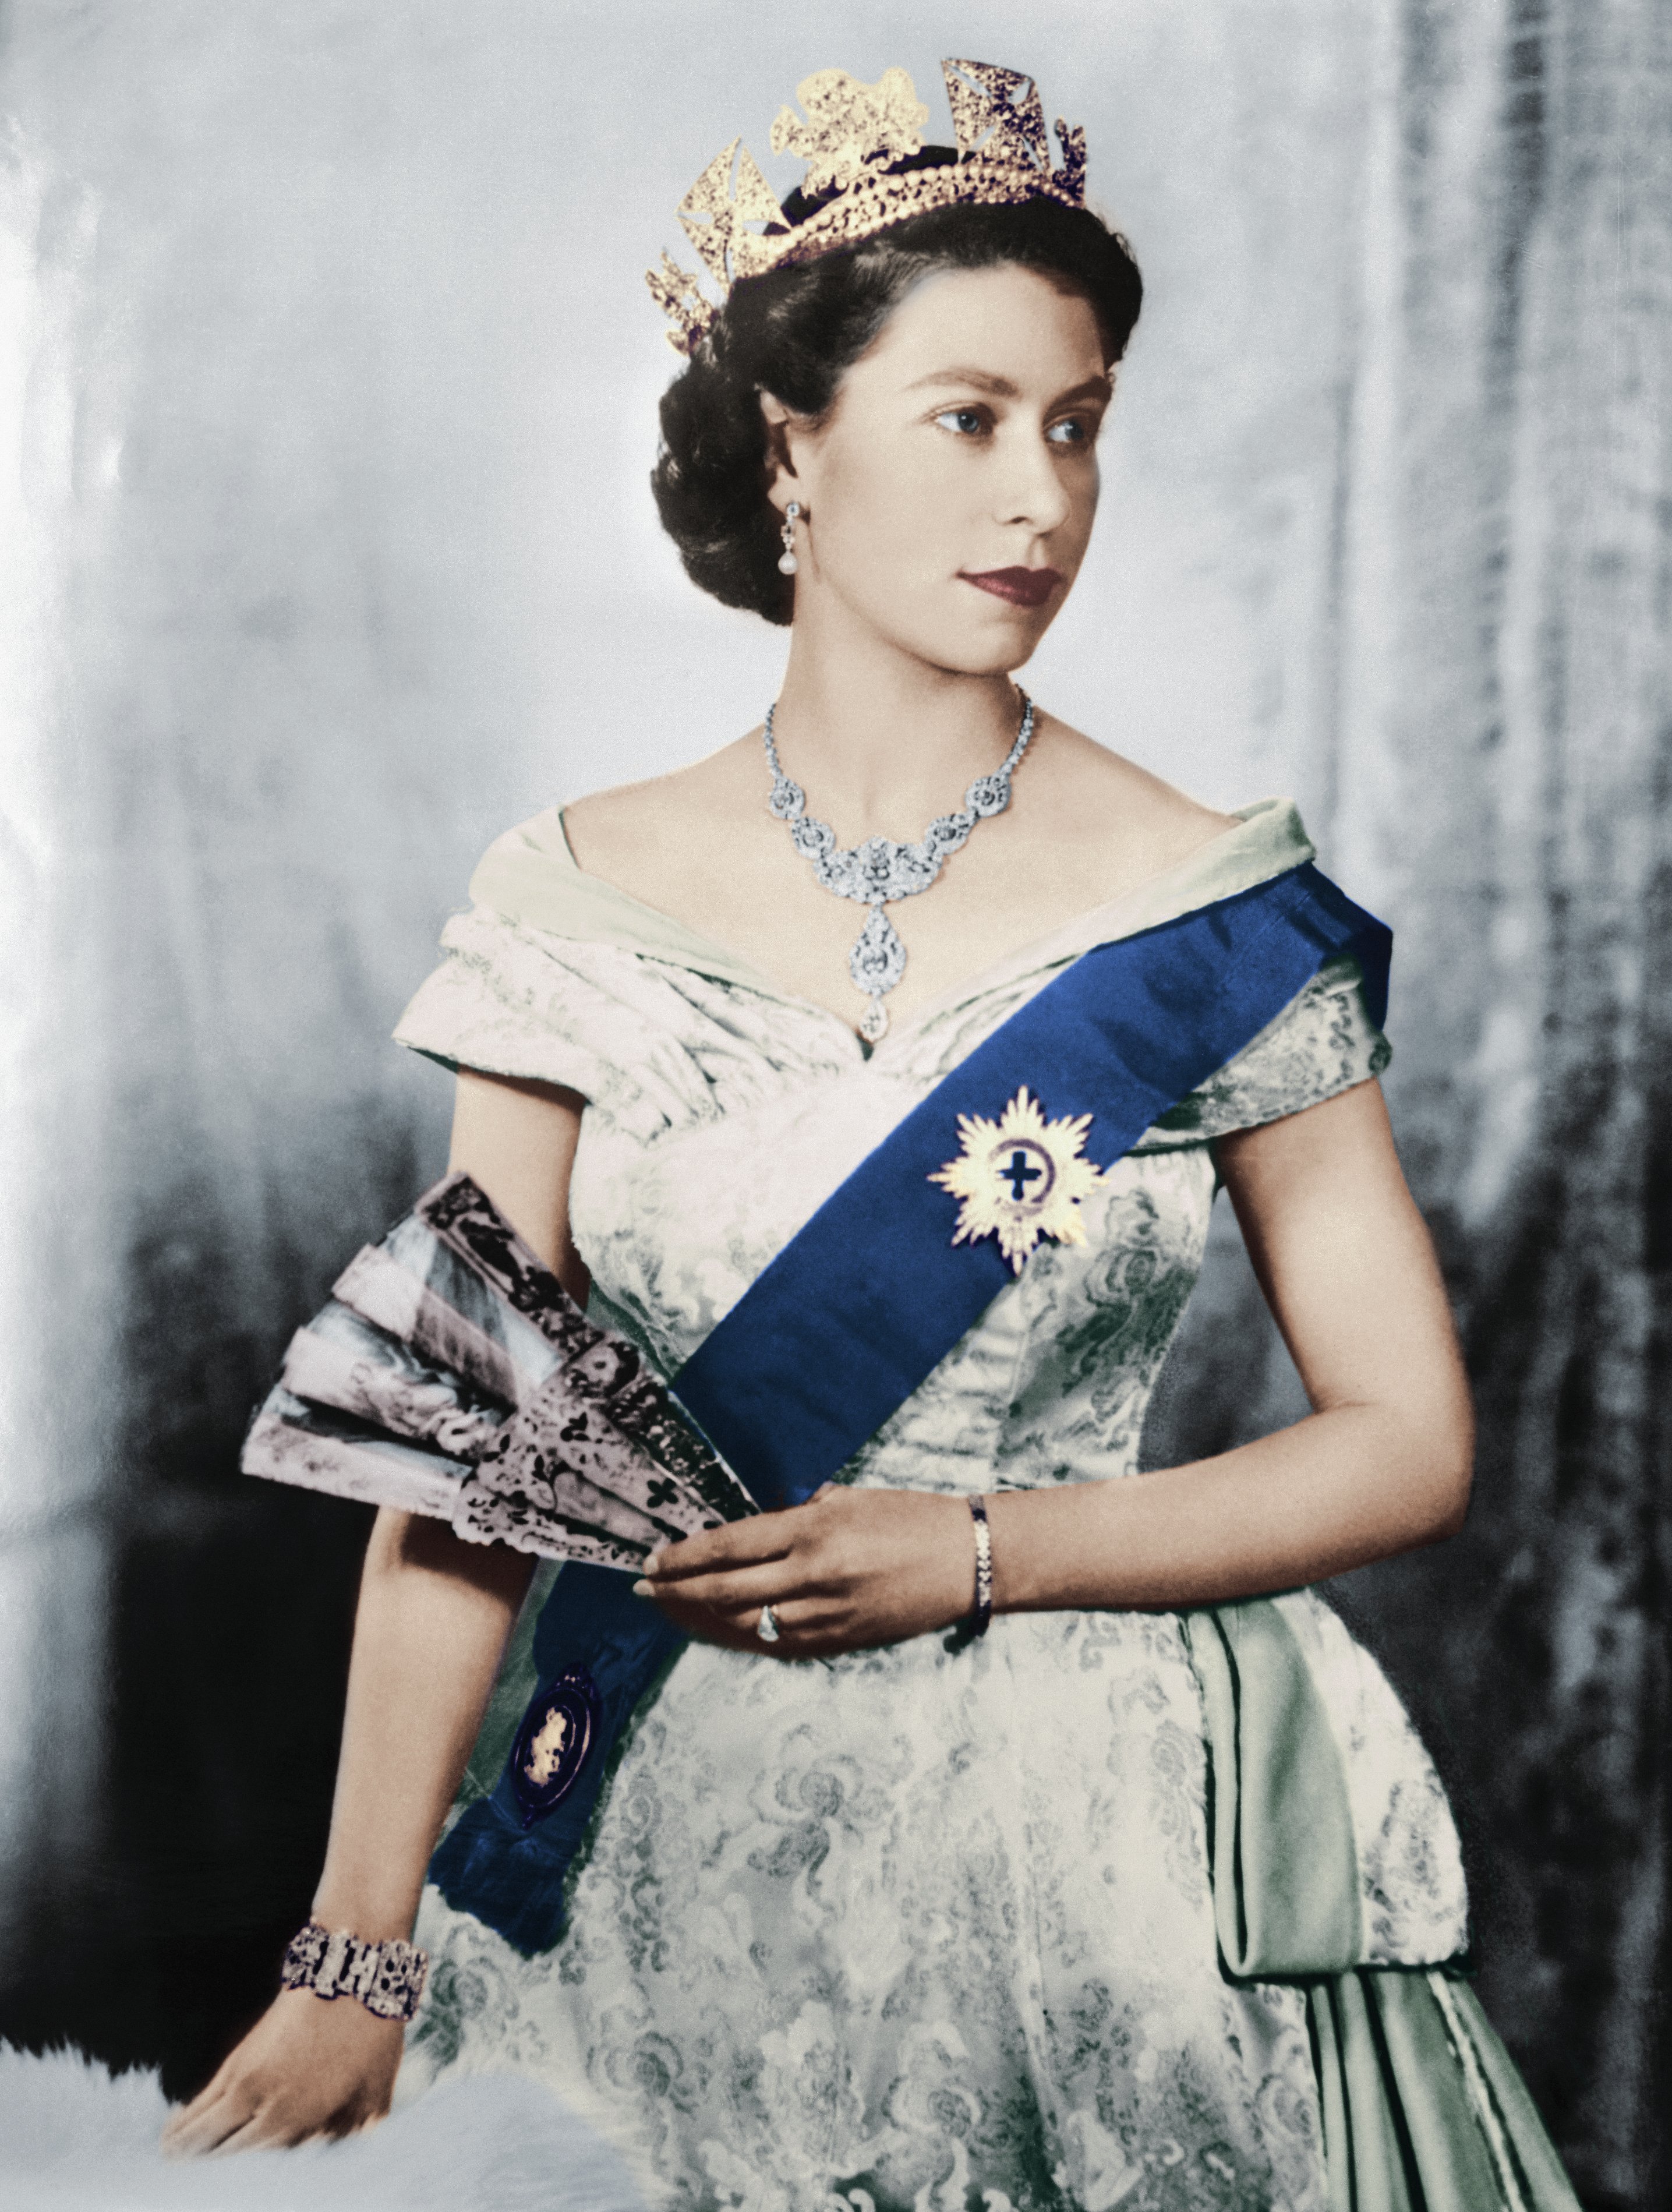 A portrait of young Queen Elizabeth II of England donning regal attire paired with a tiara. / Source: Getty Images